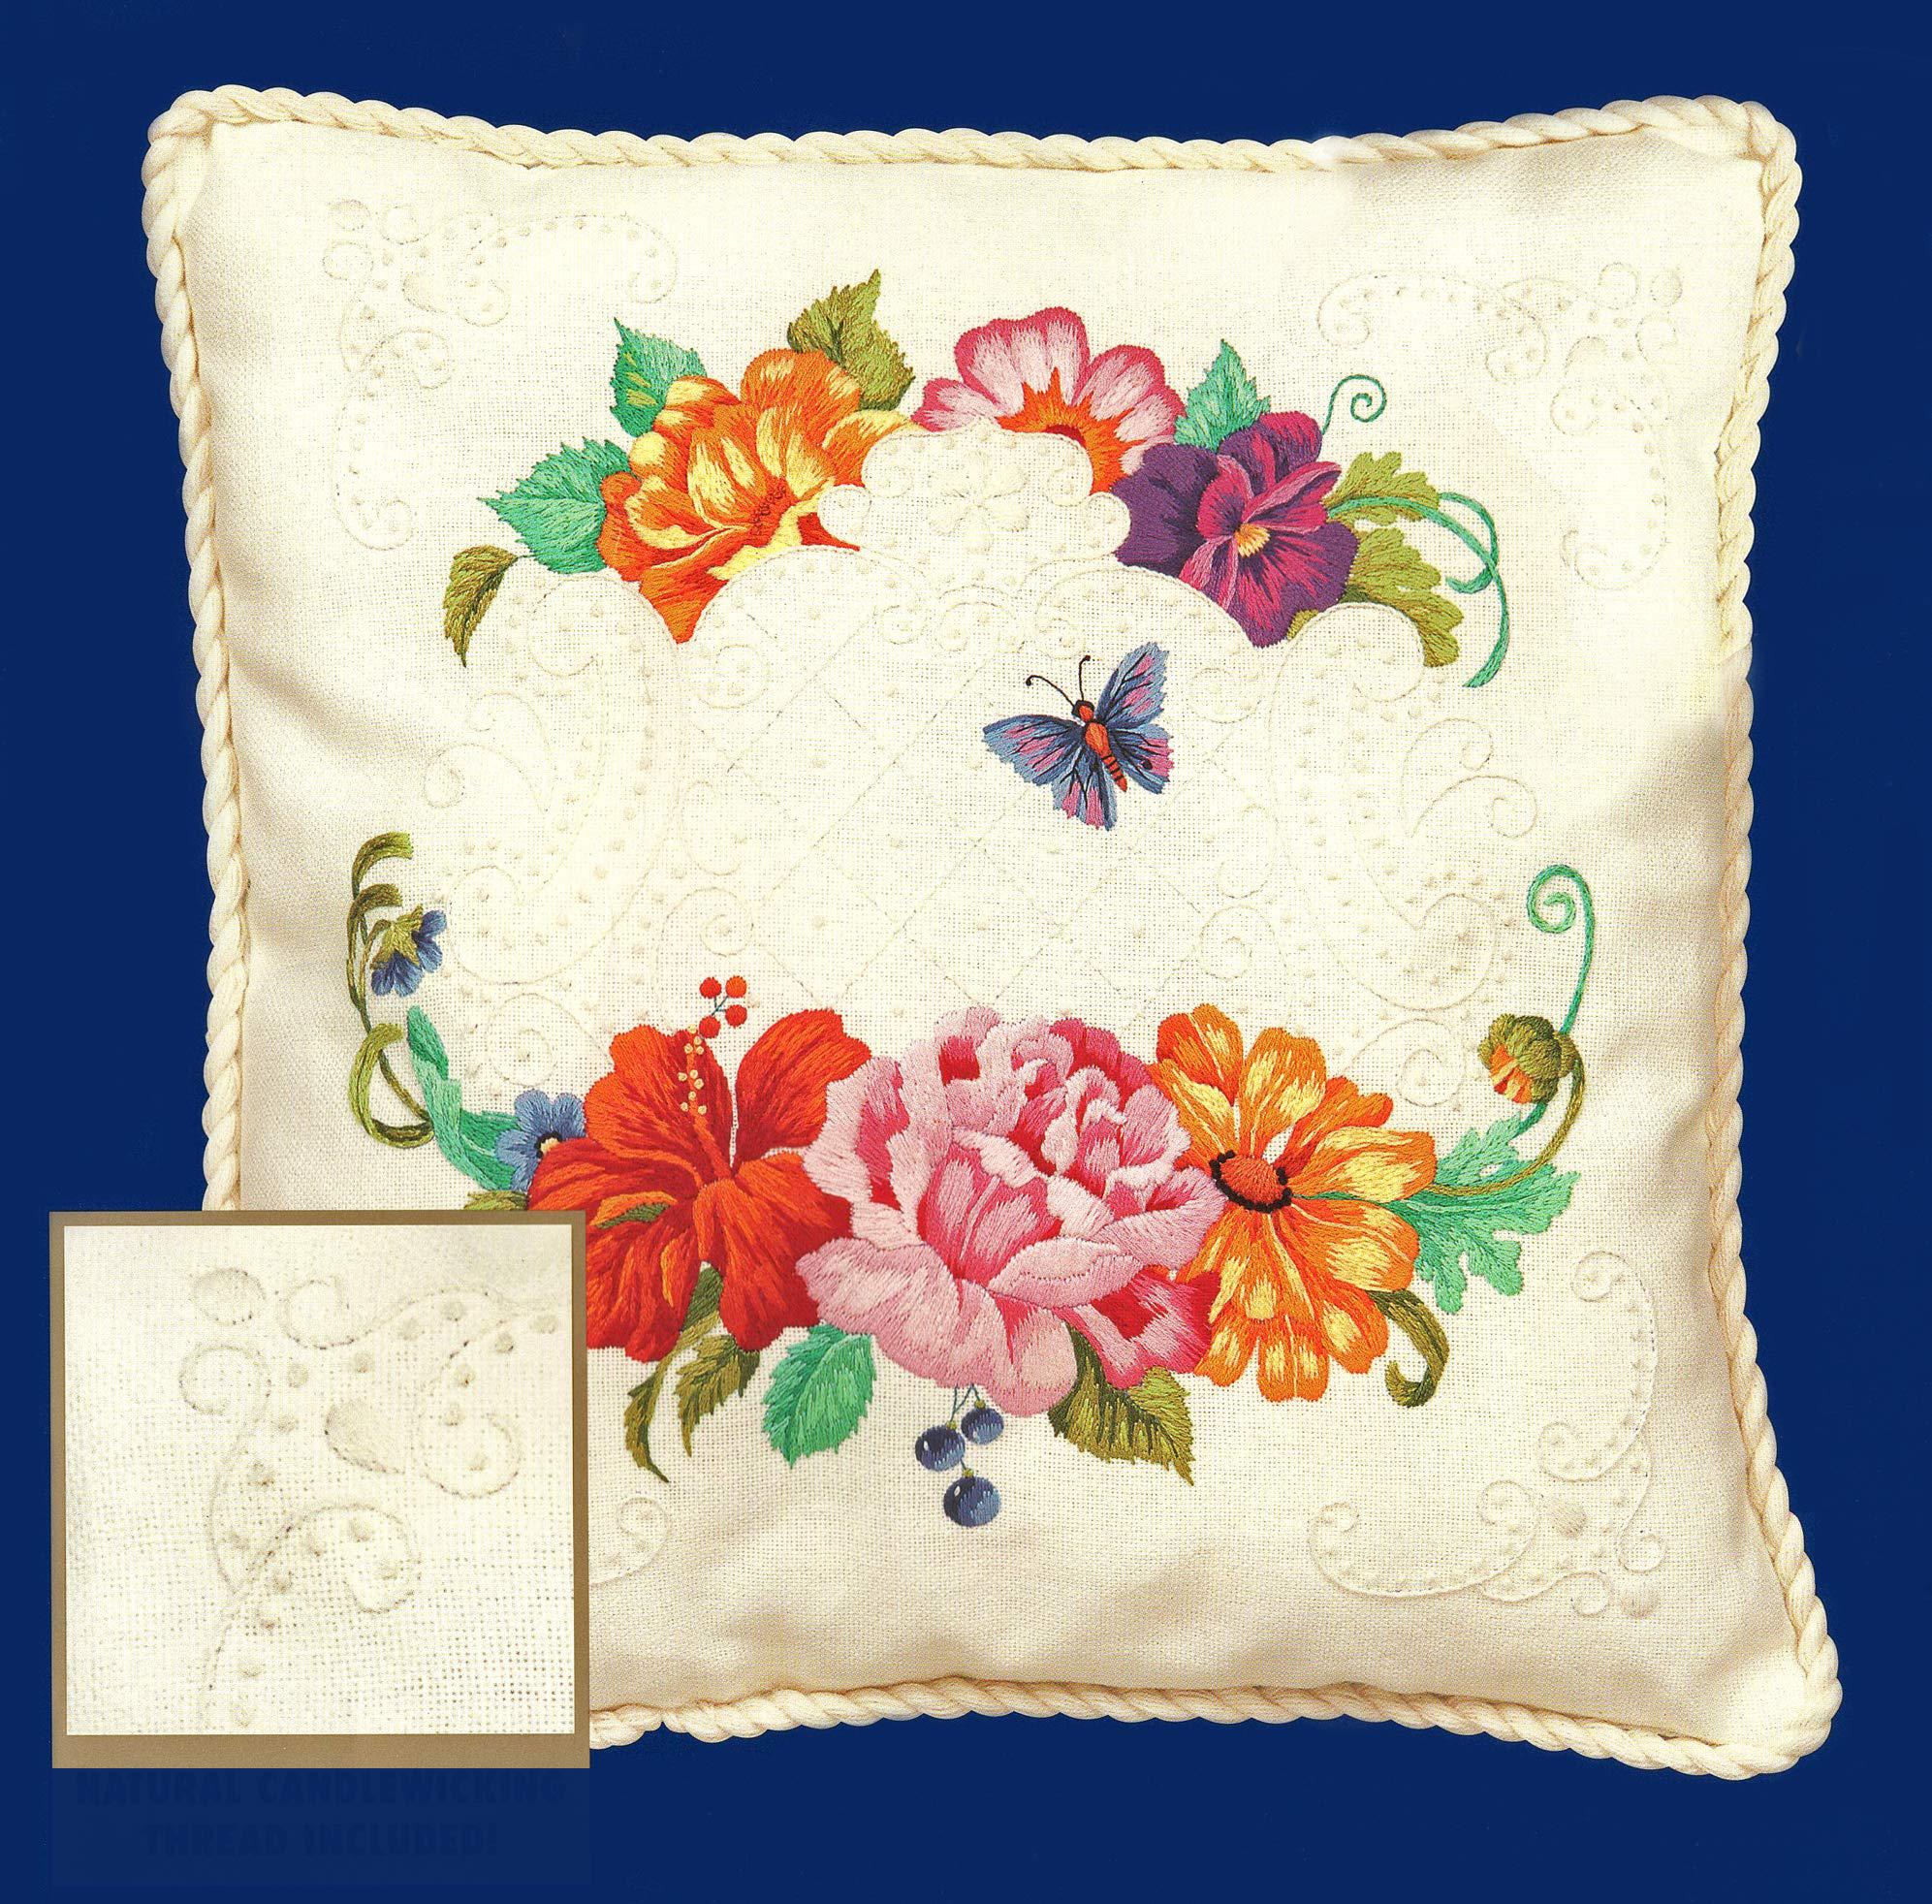 bucilla - butterfly floral pillow - stamped crewel embroidery with candlewicking kit 42638